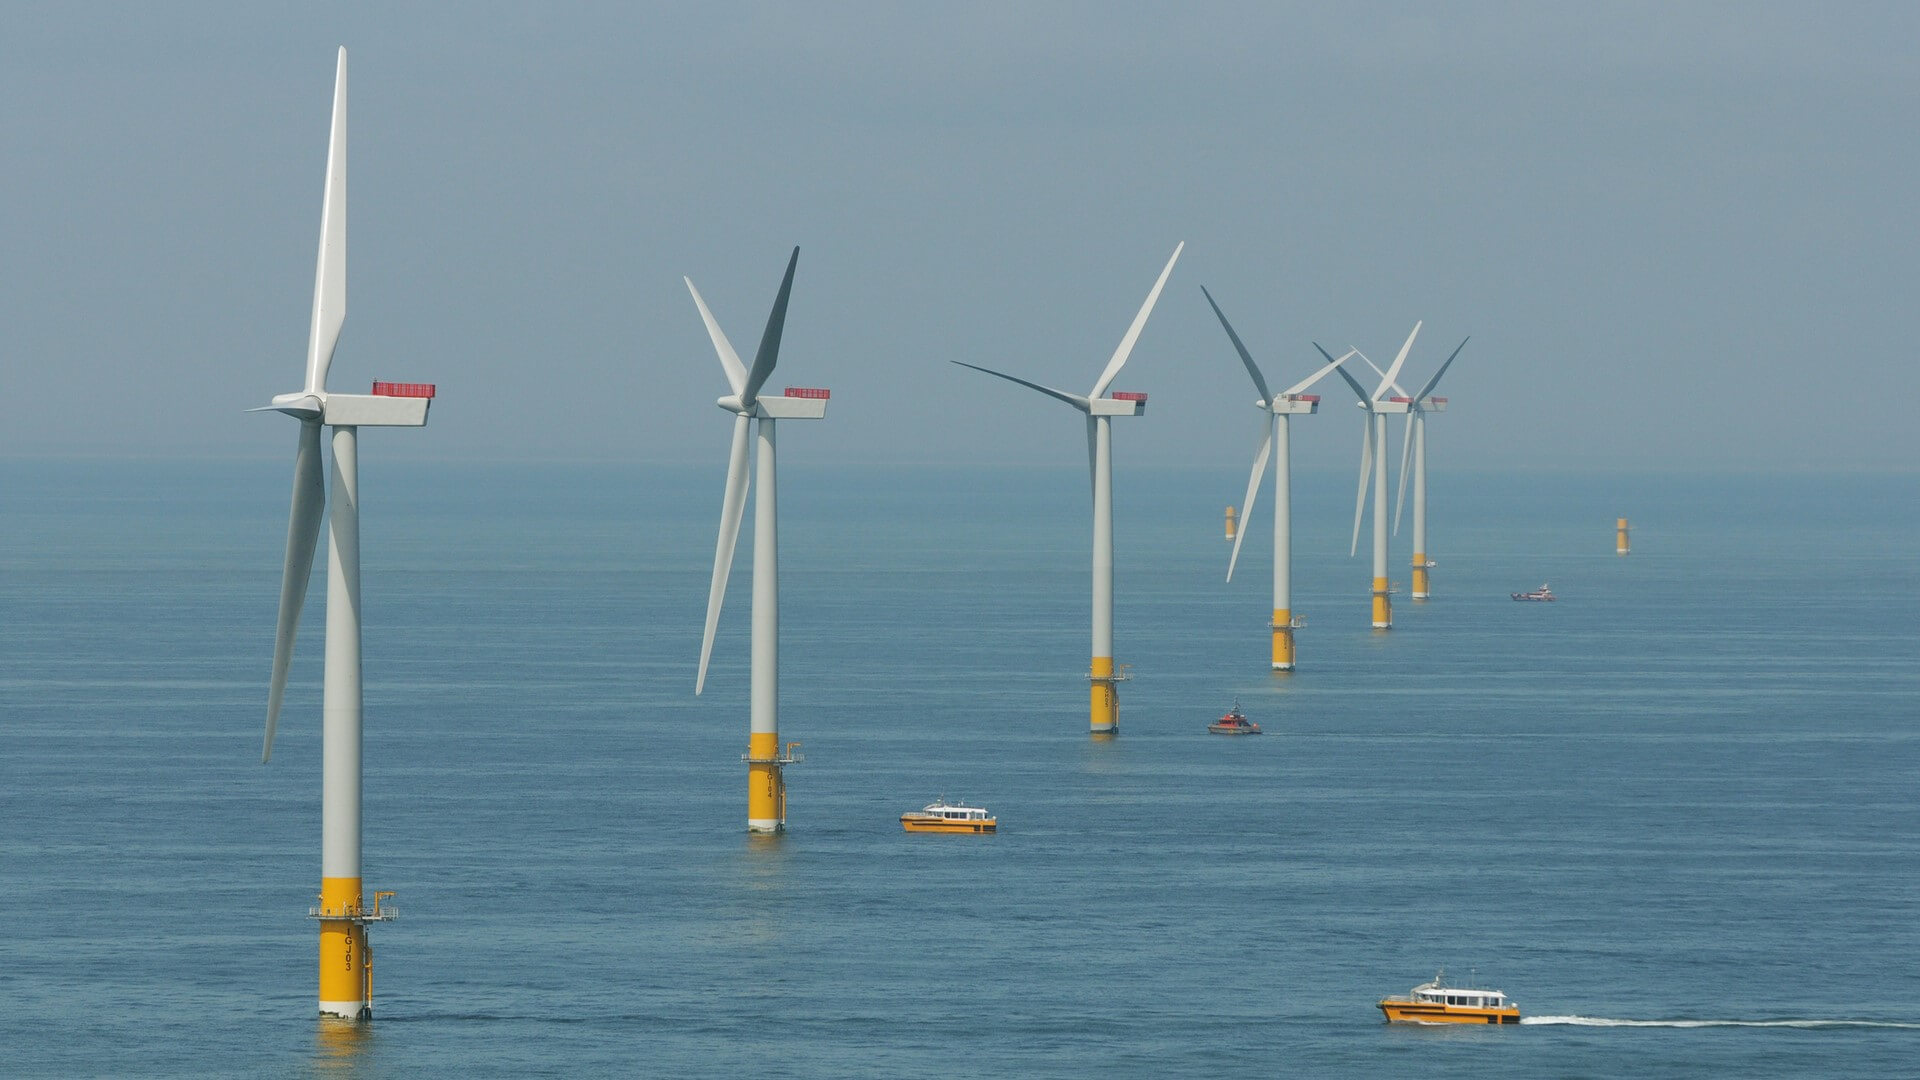 Row of offshore wind turbines running diagonally across photo and into distance